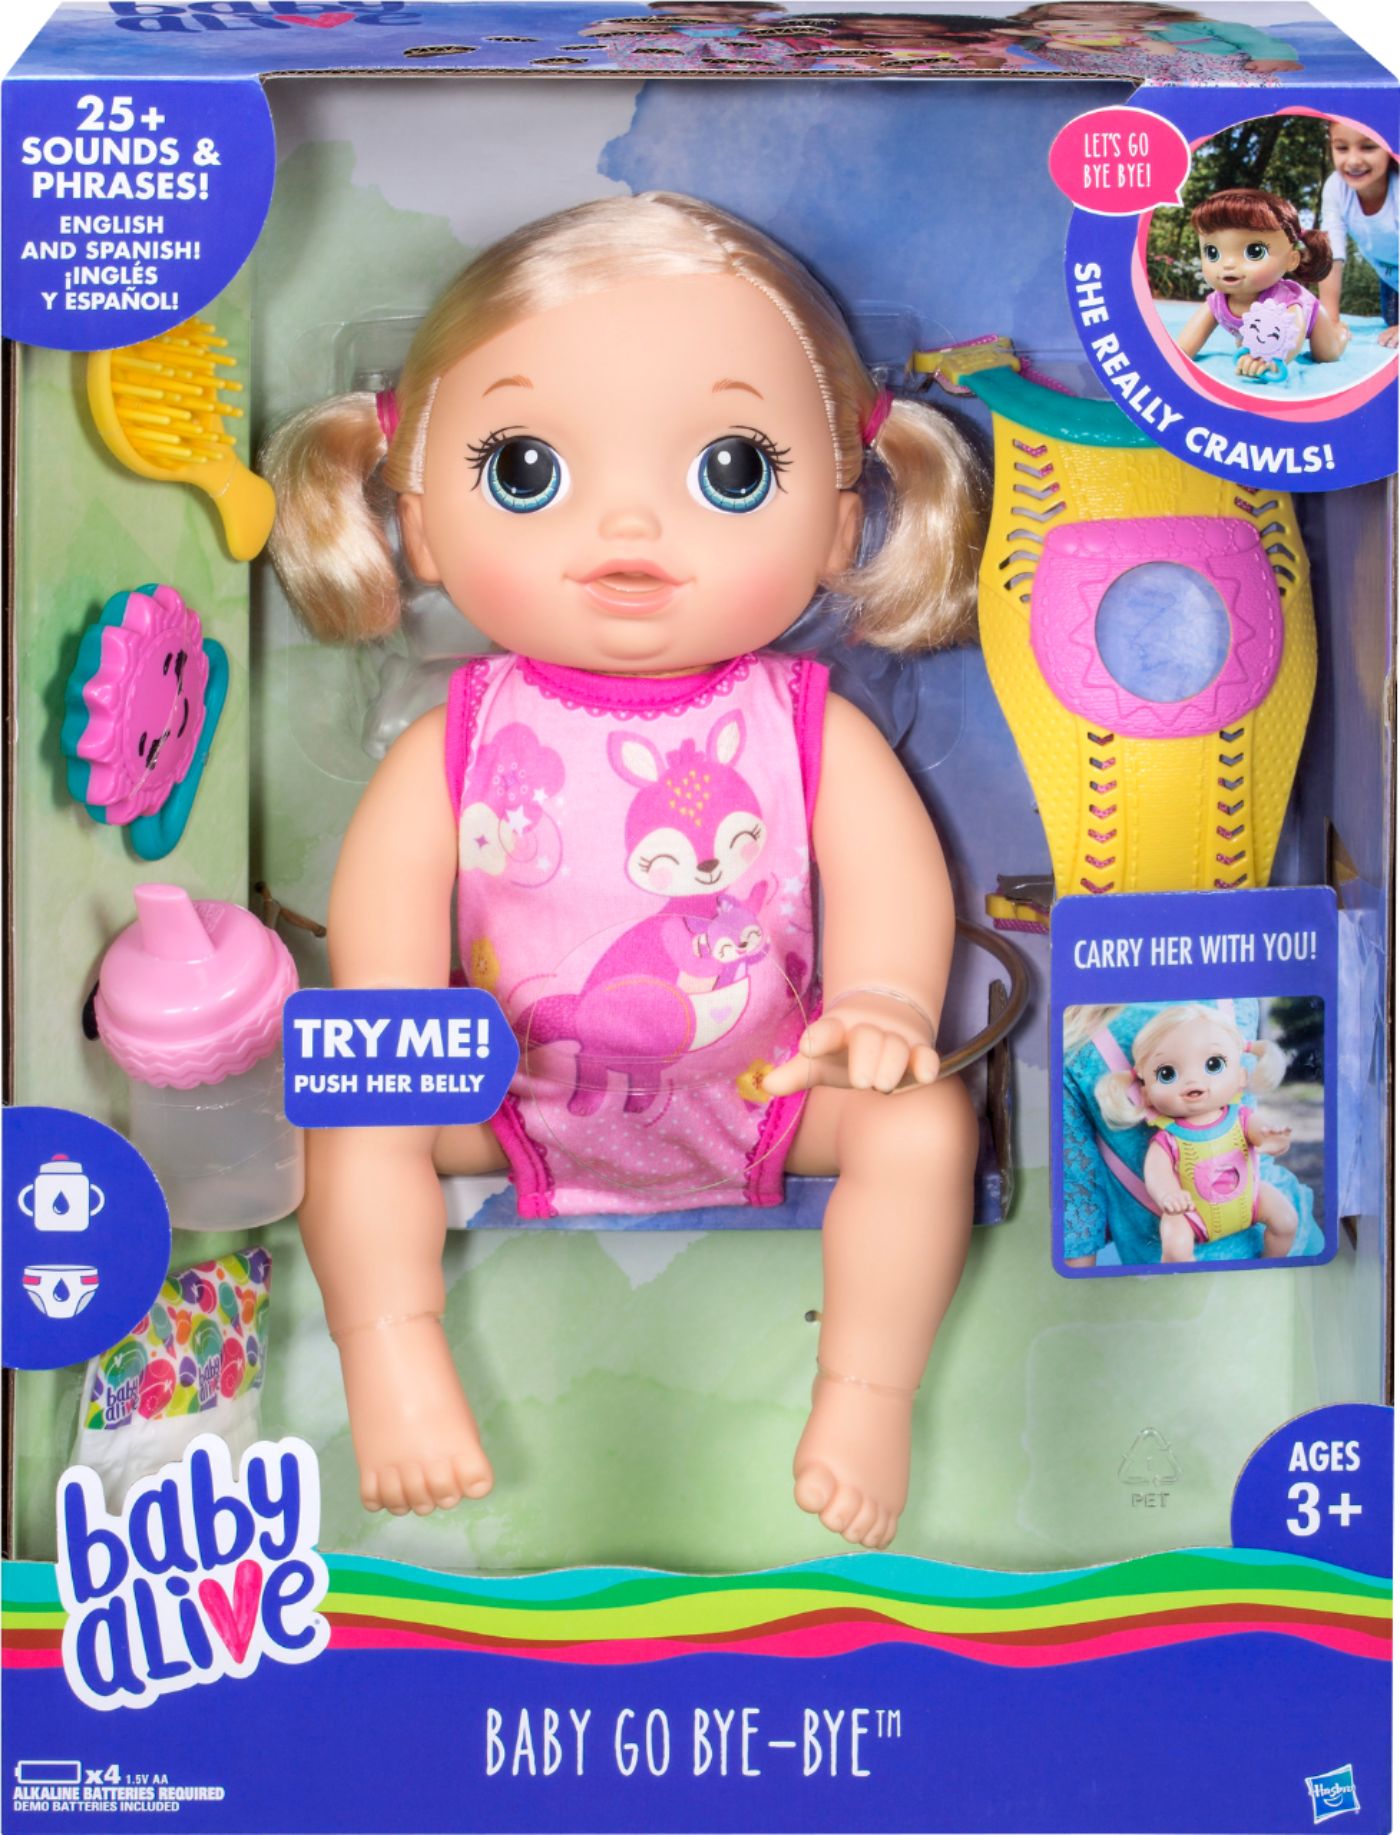 where can i buy baby alive doll